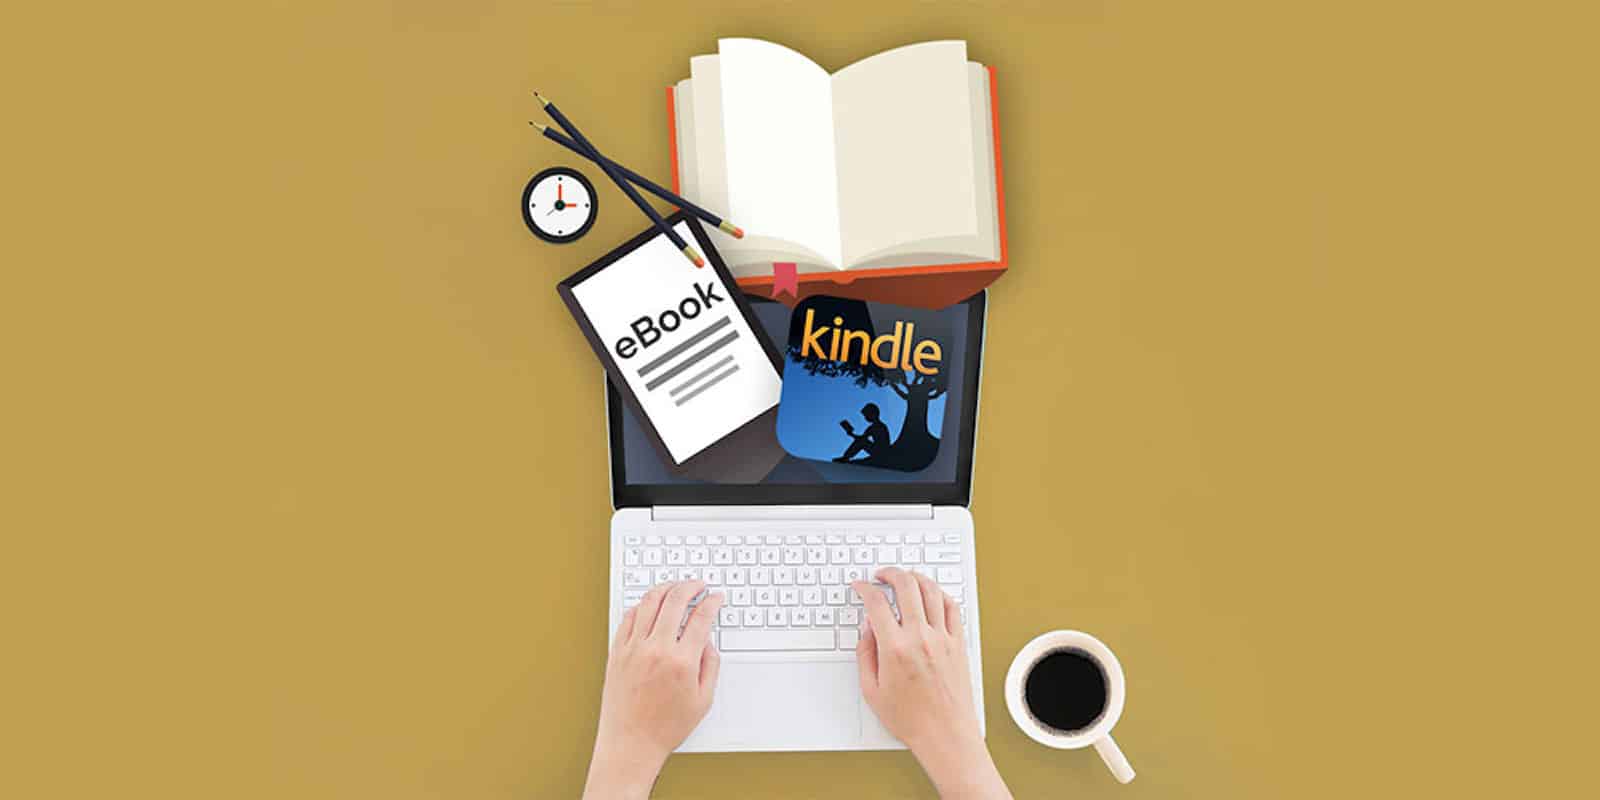 Learn the ins and outs of writing, publishing, and getting paid in the eBook ecosystem.